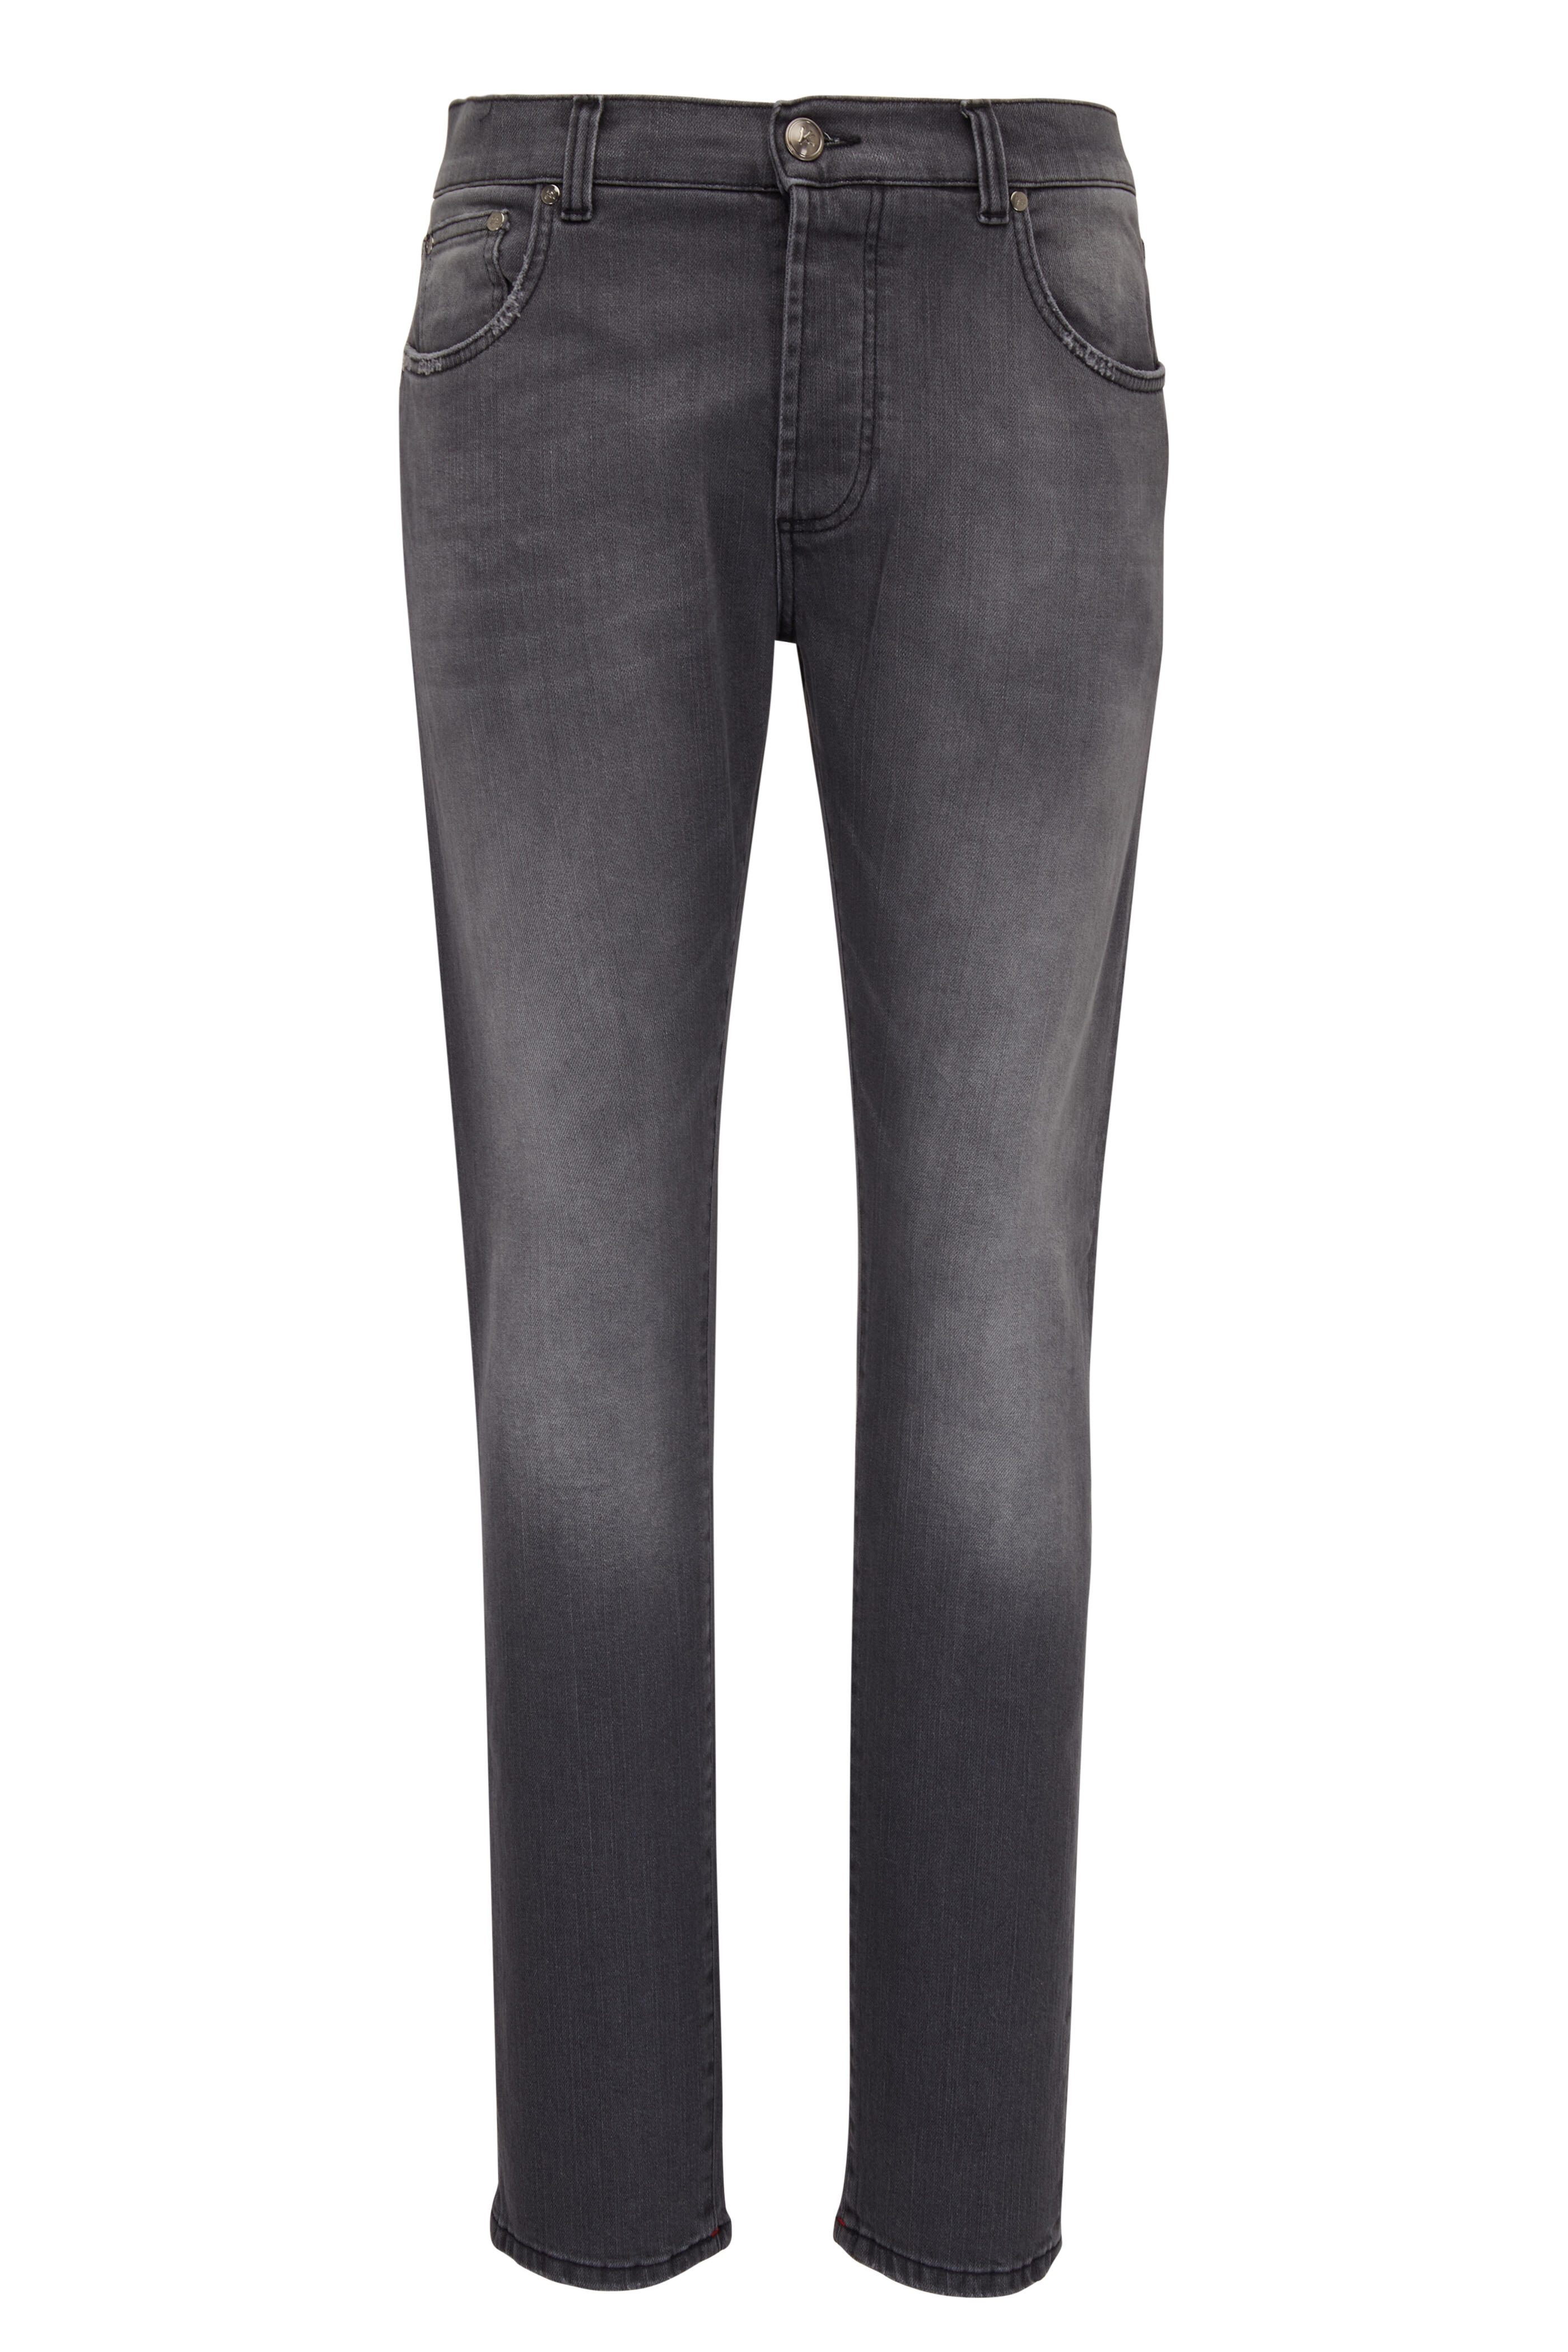 Isaia - Washed Gray Comfort Denim Jean | Mitchell Stores